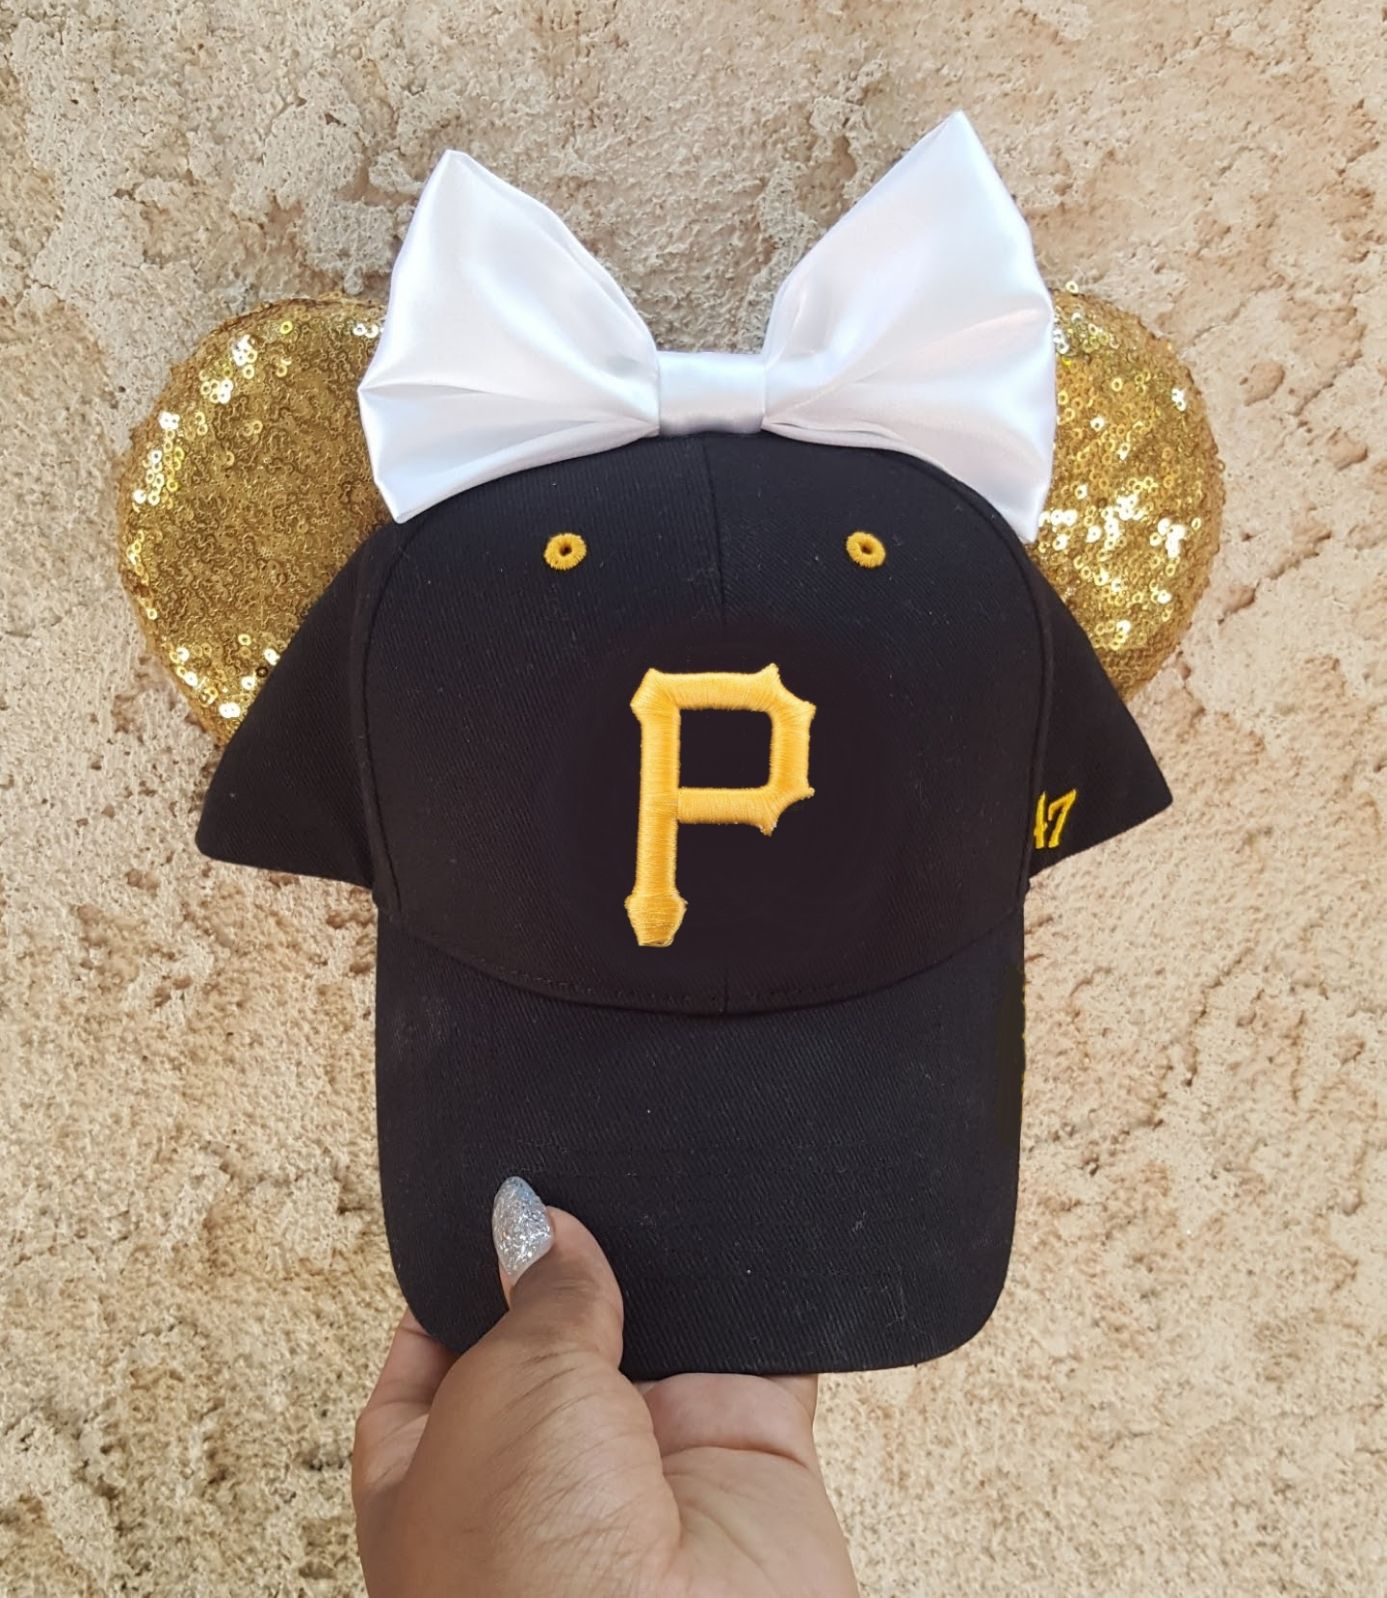 Pittsburgh Pirates Hats in Pittsburgh Pirates Team Shop 